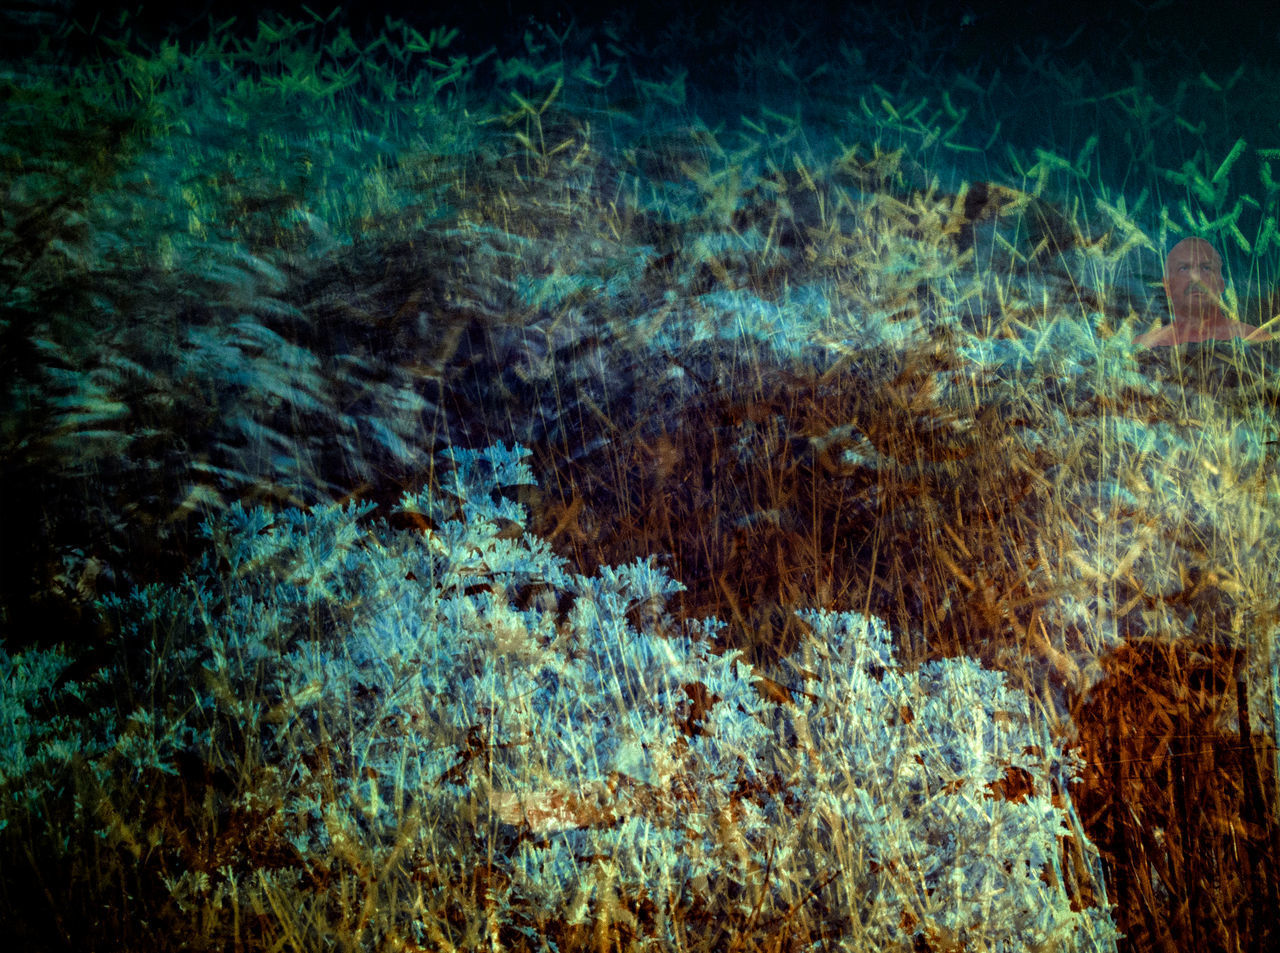 FULL FRAME SHOT OF SEA WITH PLANTS IN FOREGROUND